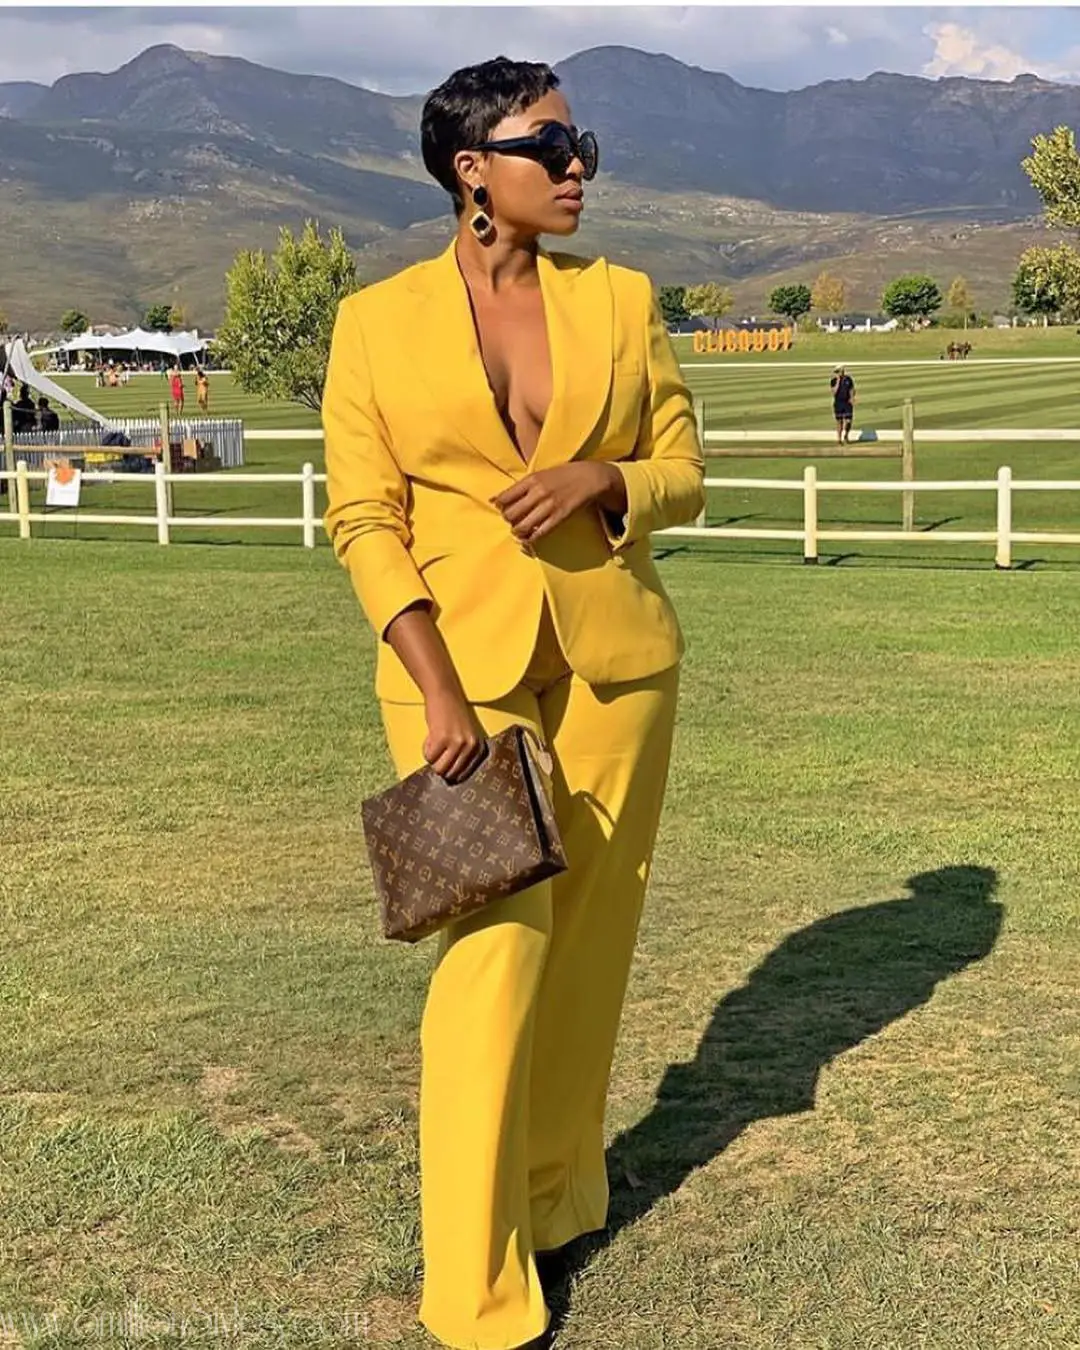 Fashionable Suits Worn By Women At The 2019 Veuve Clicquot Masters Polo